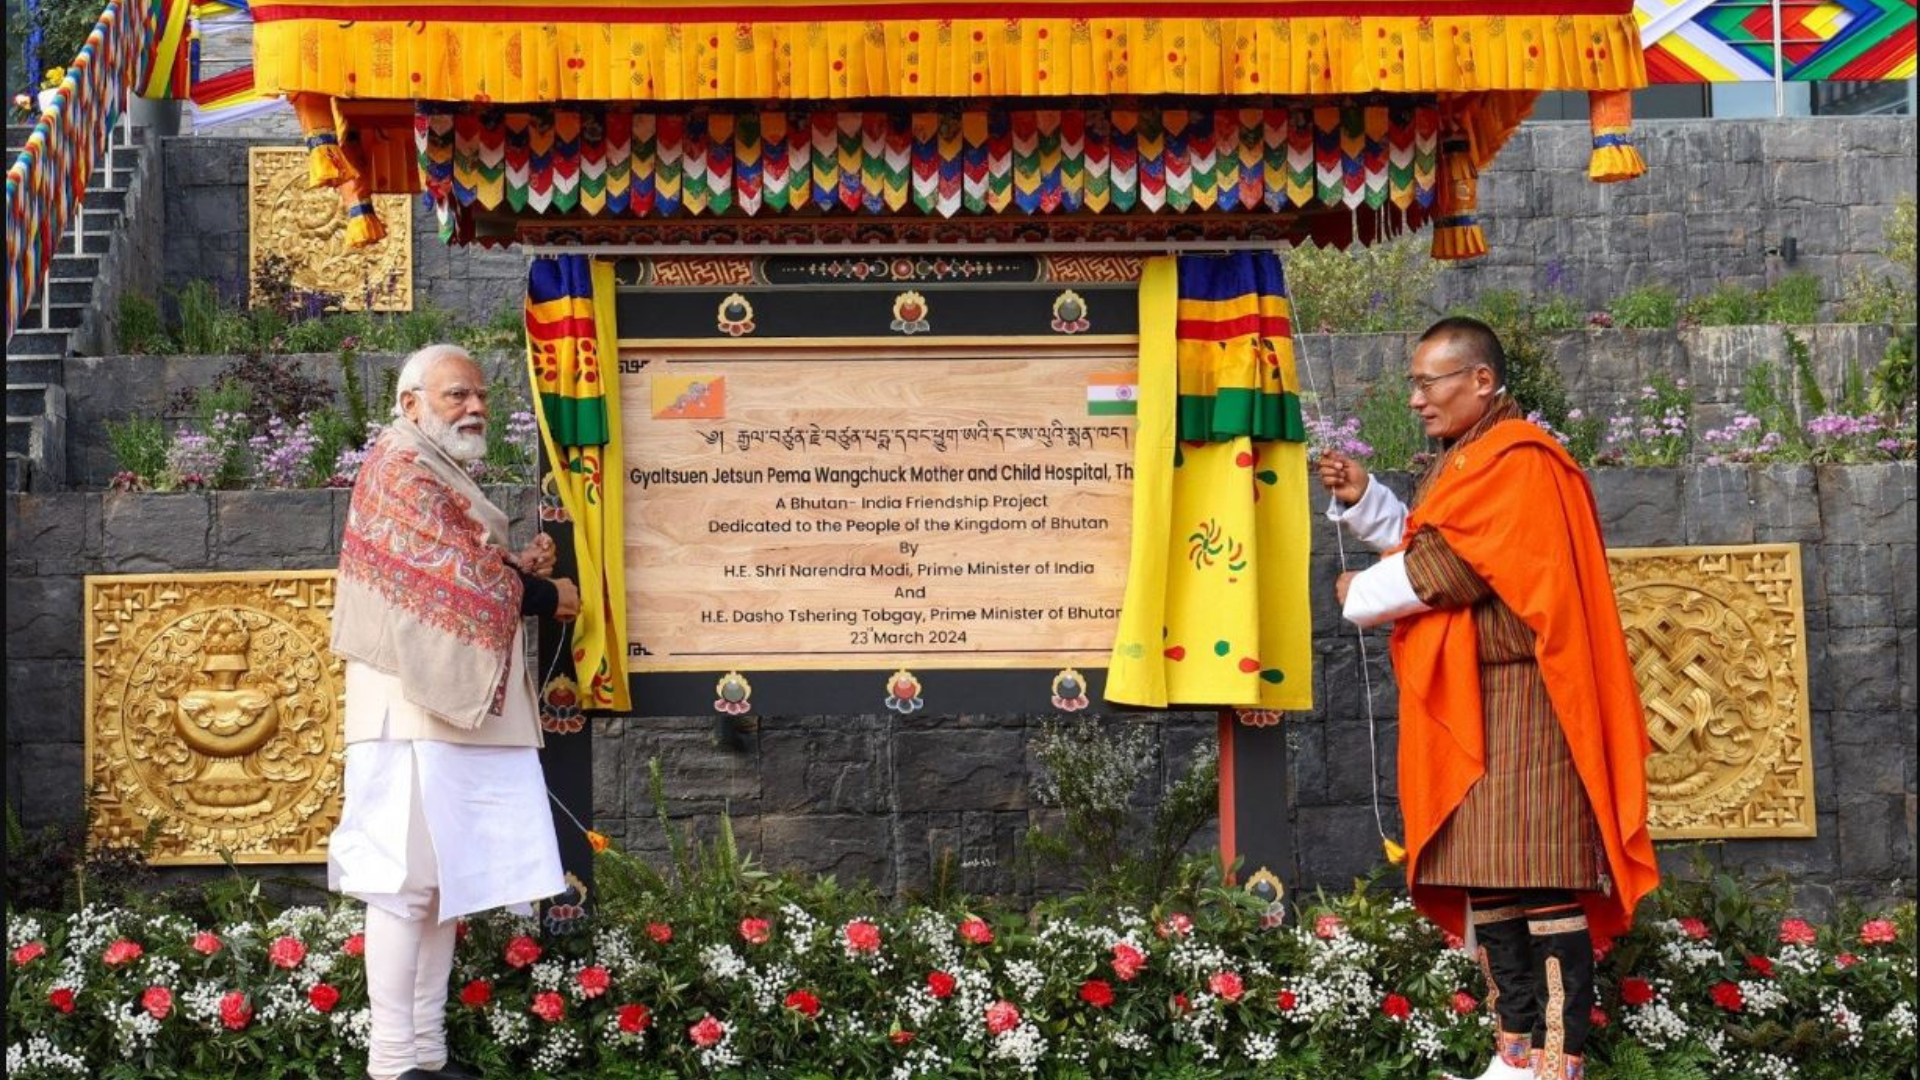 PM Modi Inaugurates Hospital For Mother And Child, Funded By India In Thimphu, Bhutan